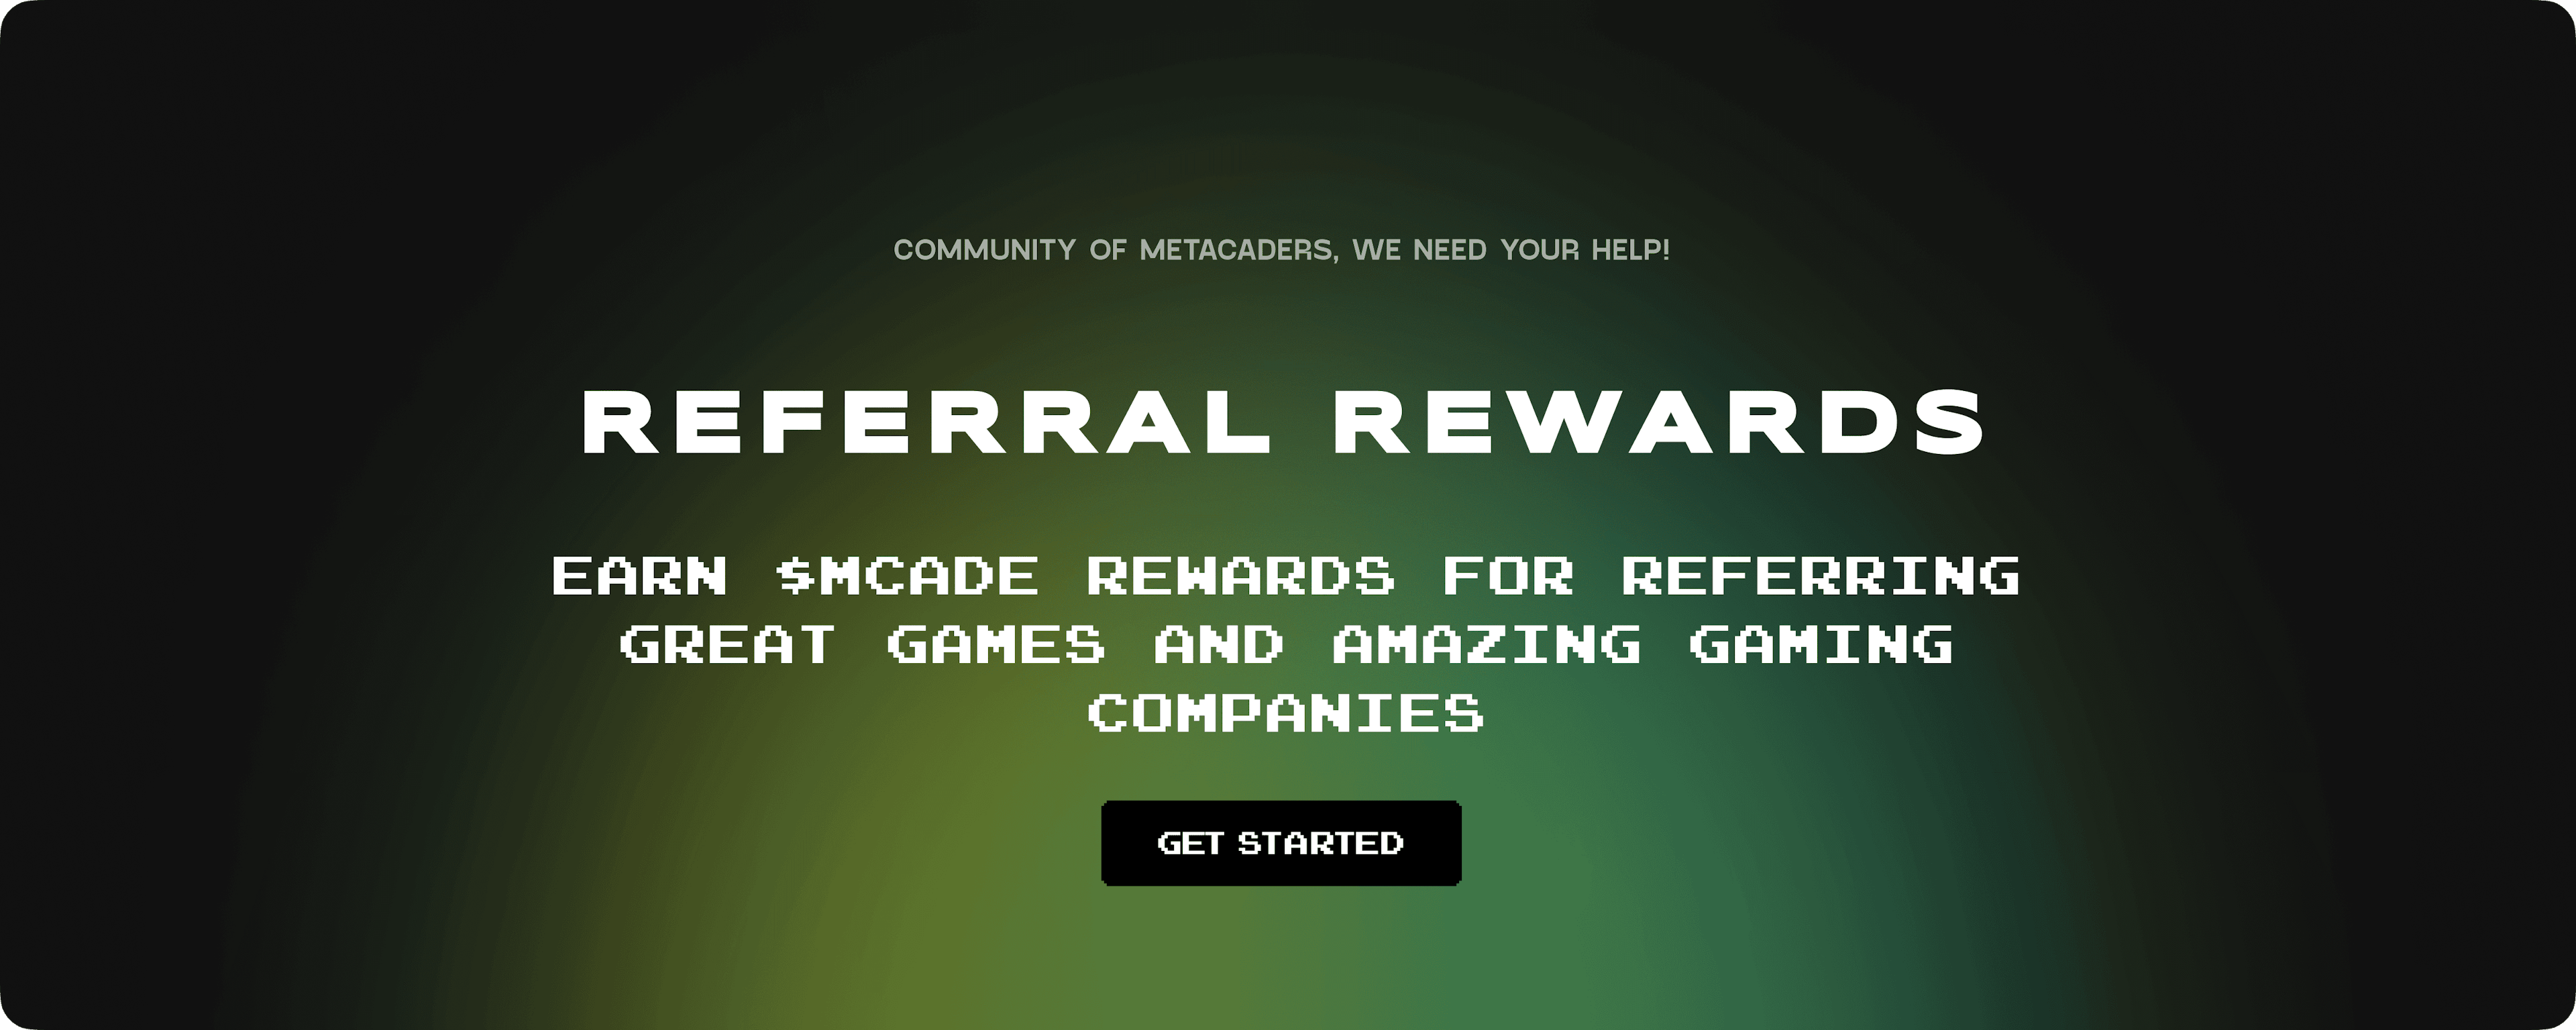 Referrals Carousel-min.png